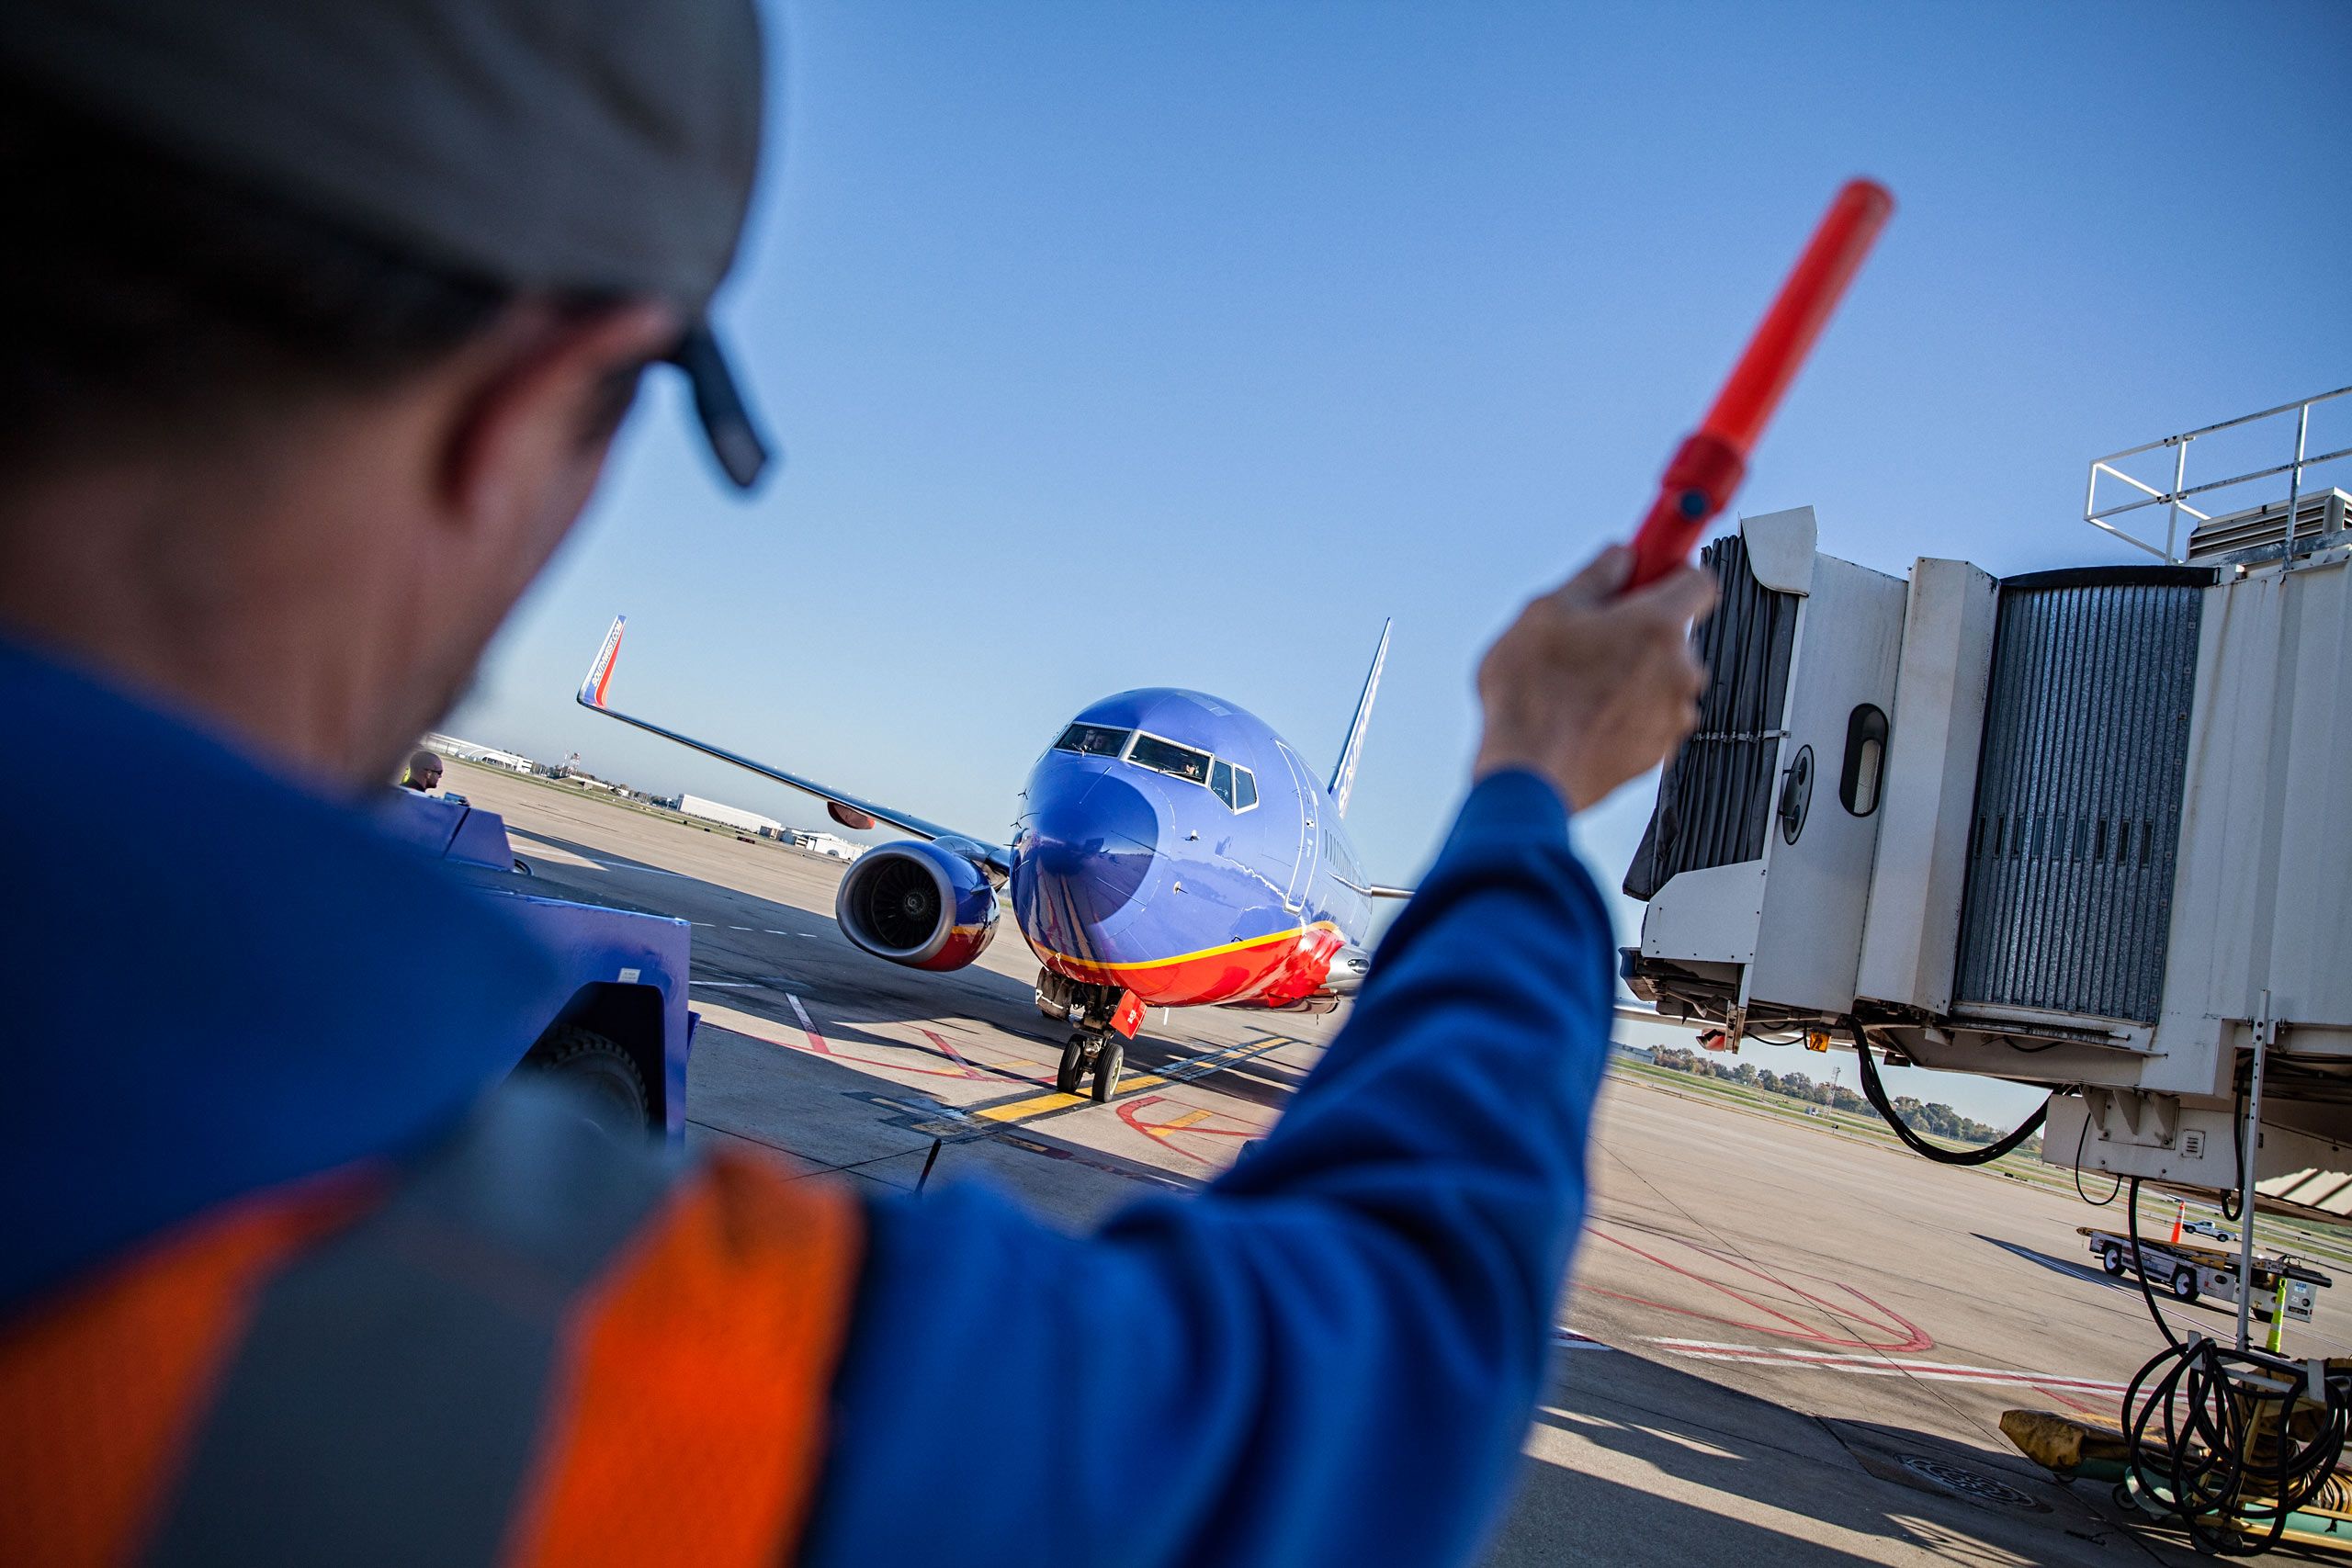 Aircraft Marshaling A Southwest Plane To the Gate